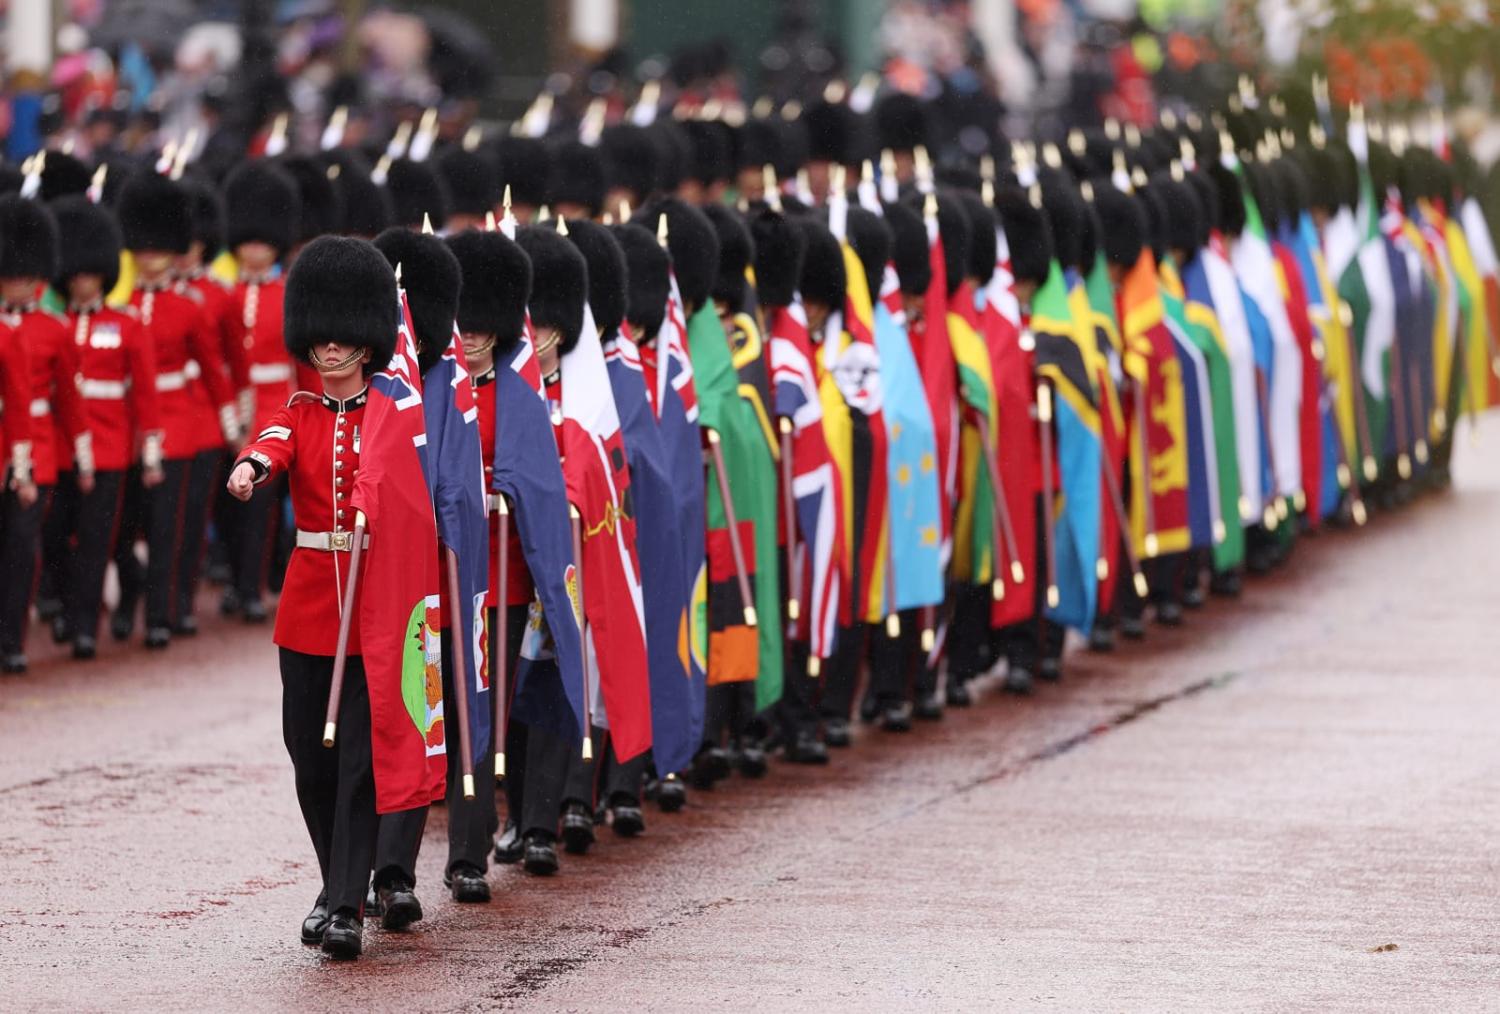 Foot guards carrying the flags of Commonwealth nations during the coronation ceremony of King Charles III and Queen Camilla  (Richard Heathcote via Getty Images)